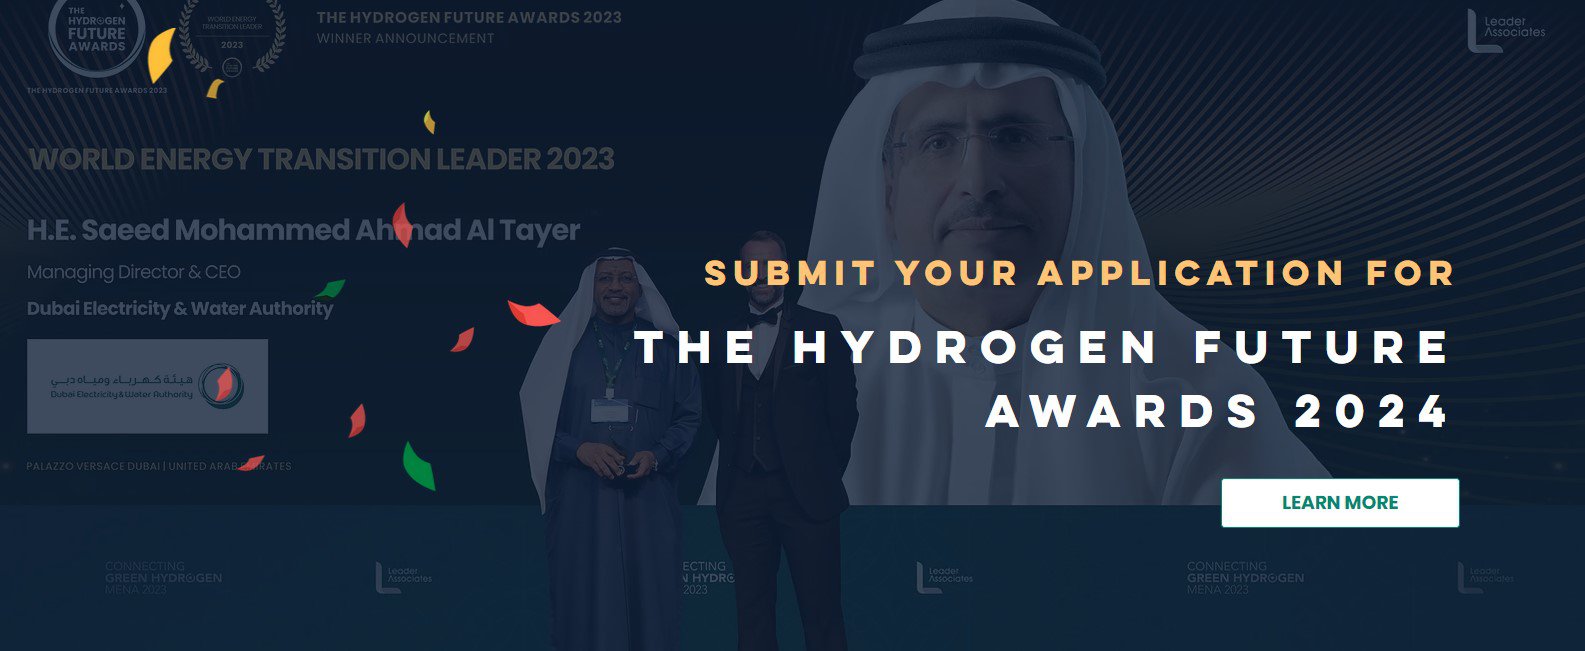 5 THE HYDROGEN FUTURE AWARDS 2024